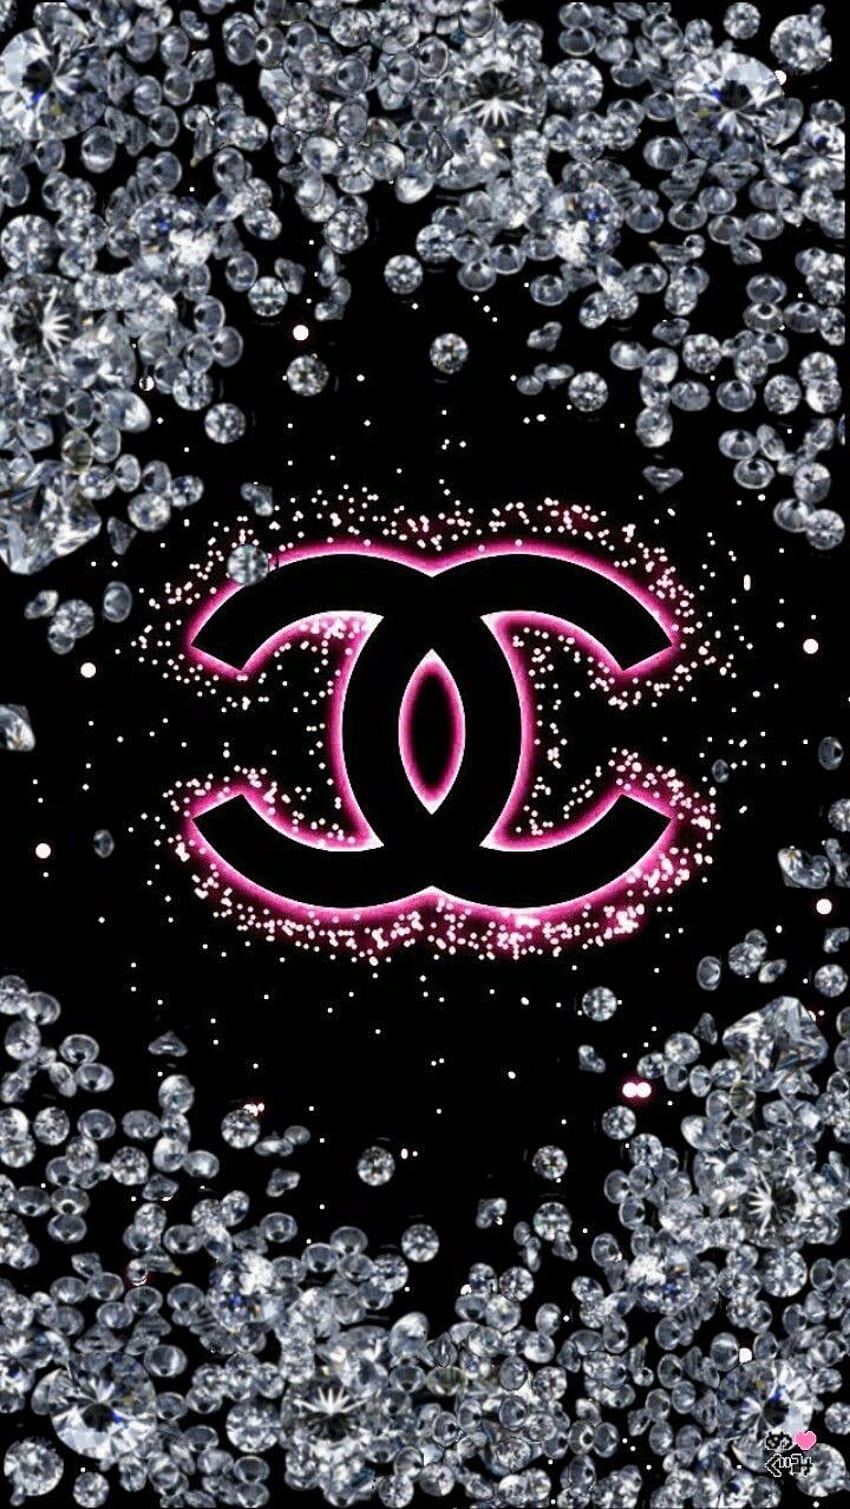 DIY How to make Bling  Chanel Wall Canvas Art  Z Gallerie Inspired Chanel  Art  Chanelle Novosey  YouTube